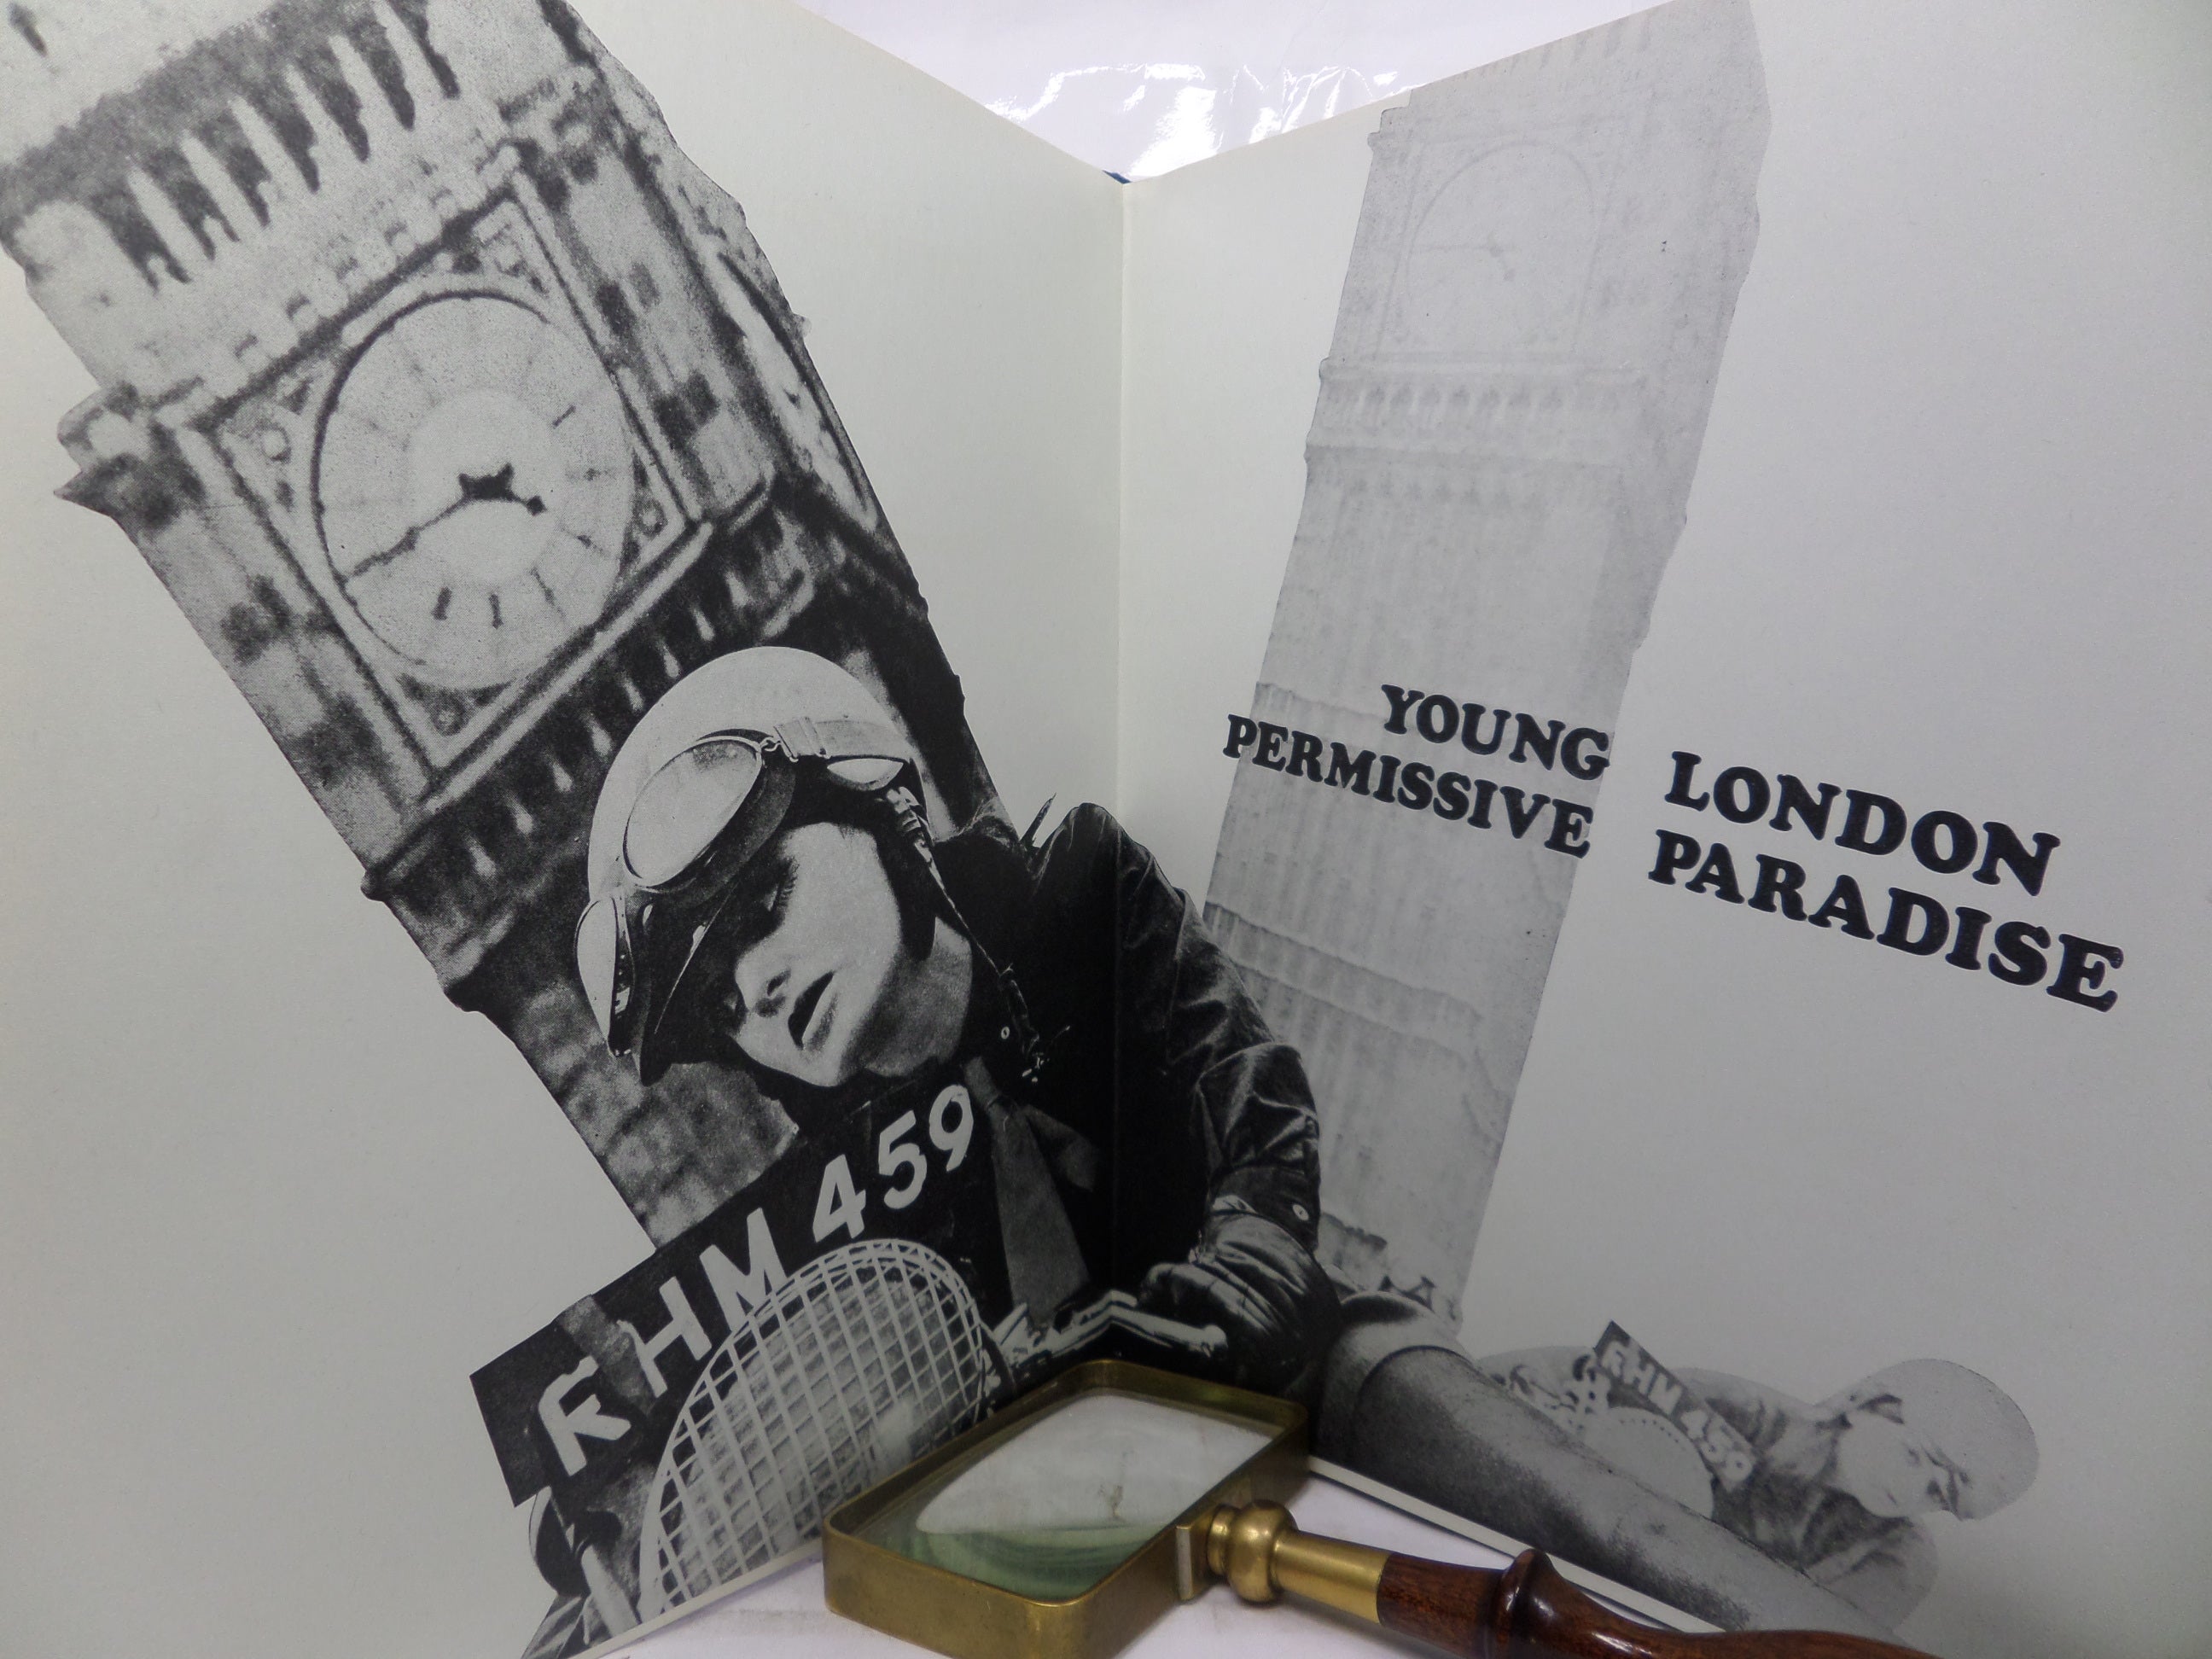 YOUNG LONDON: PERMISSIVE PARADISE BY FRANK HABICHT 1969 FIRST EDITION HARDBACK